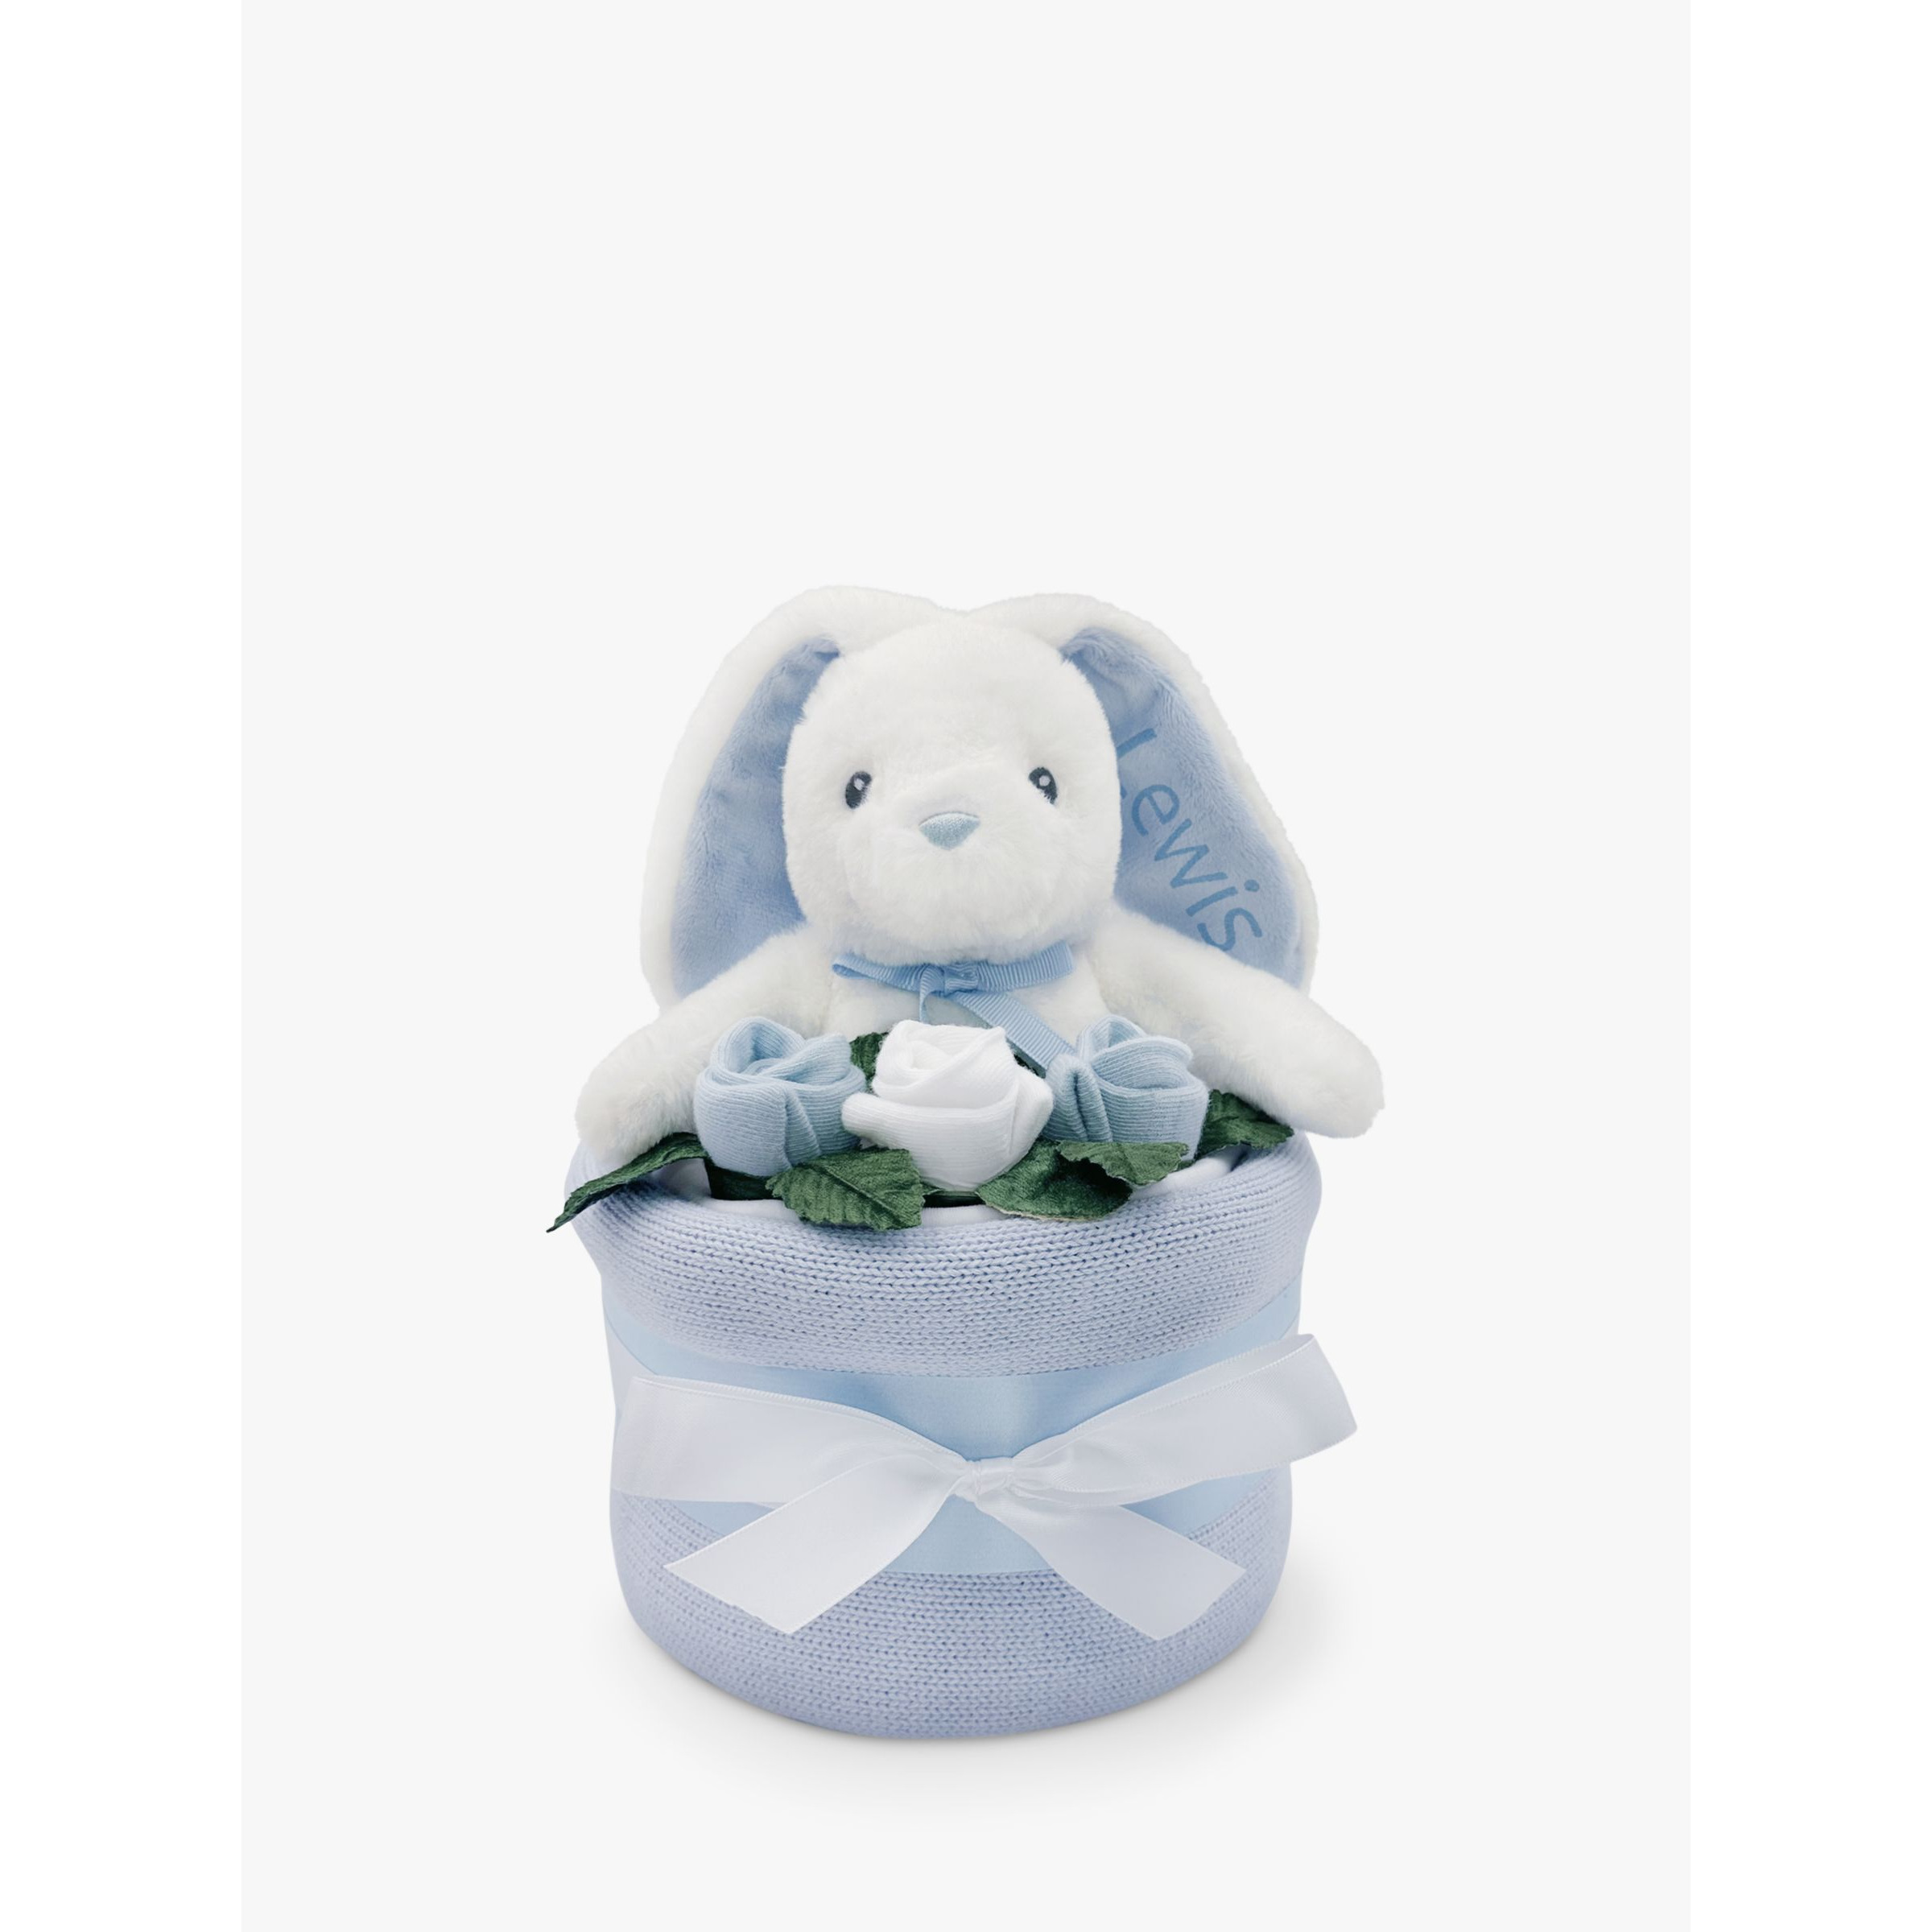 Babyblooms Blanket Cake with Personalised Baby Bunny Soft Toy, Light Blue - image 1